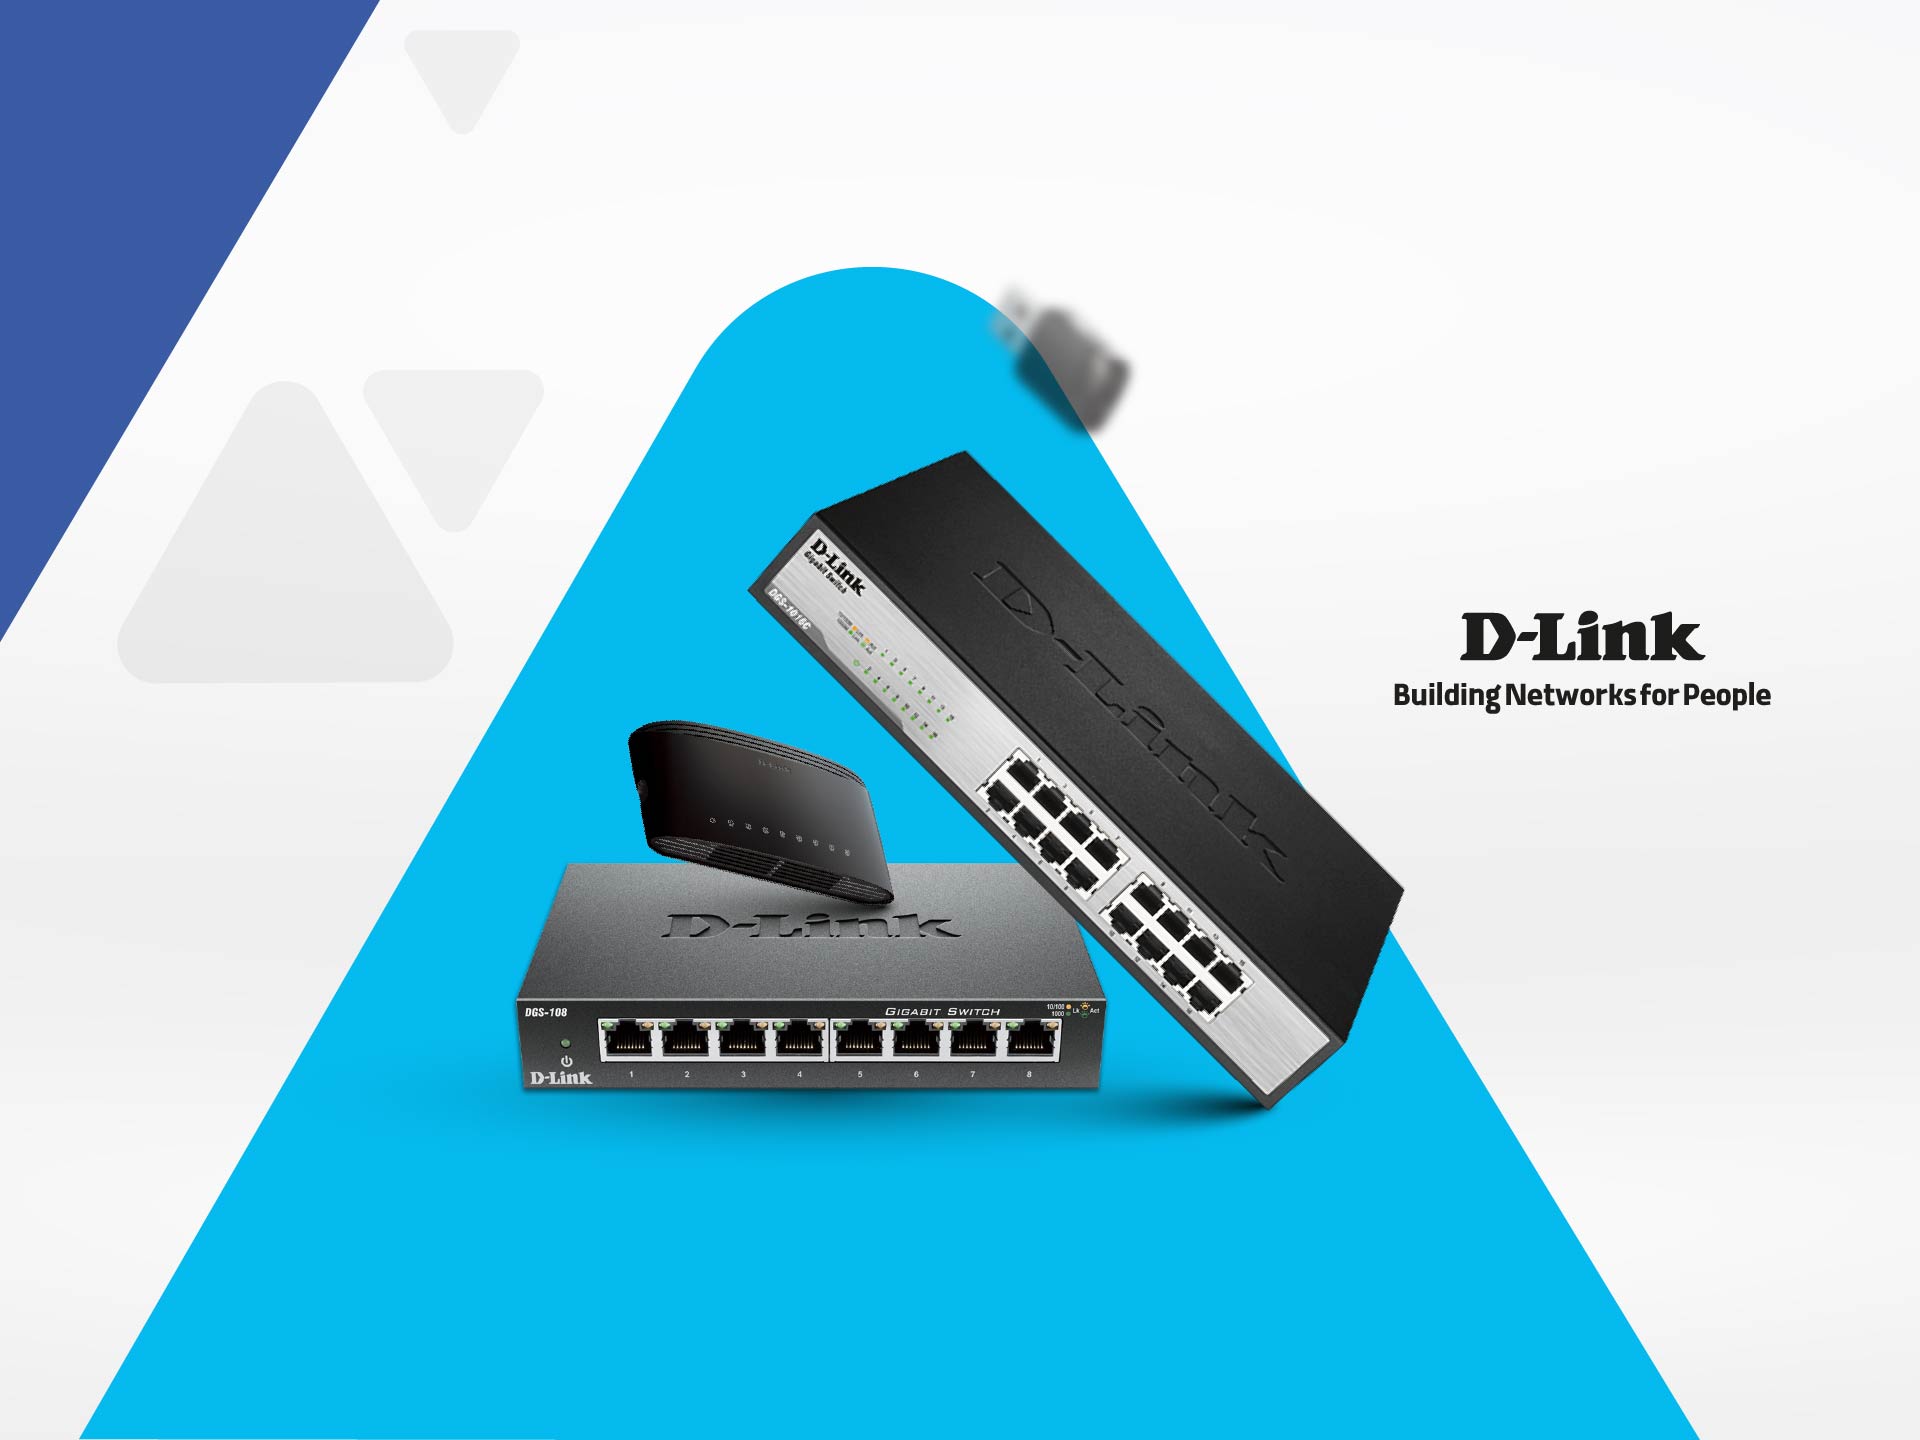 Dlink Products